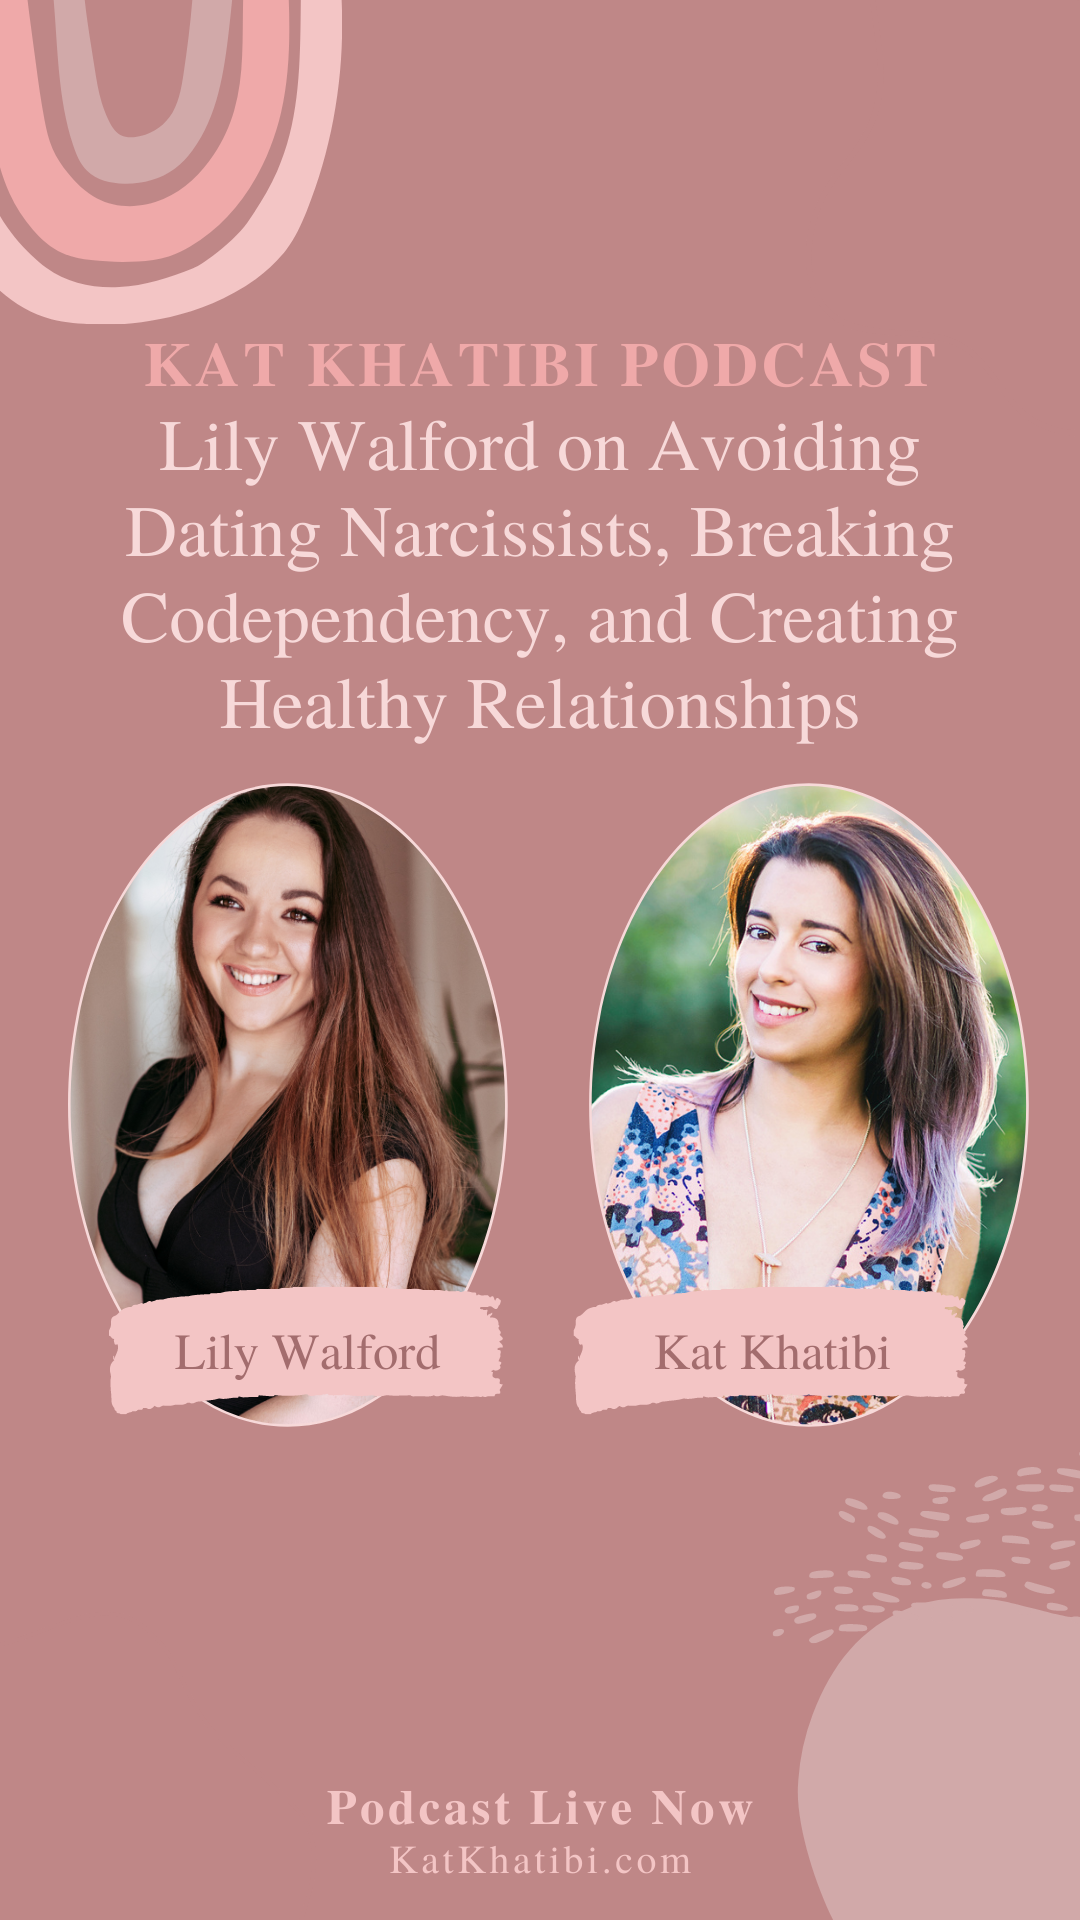 Lily Walford on Avoiding Dating Narcissists, Breaking Codependency, and Creating Healthy Relationships